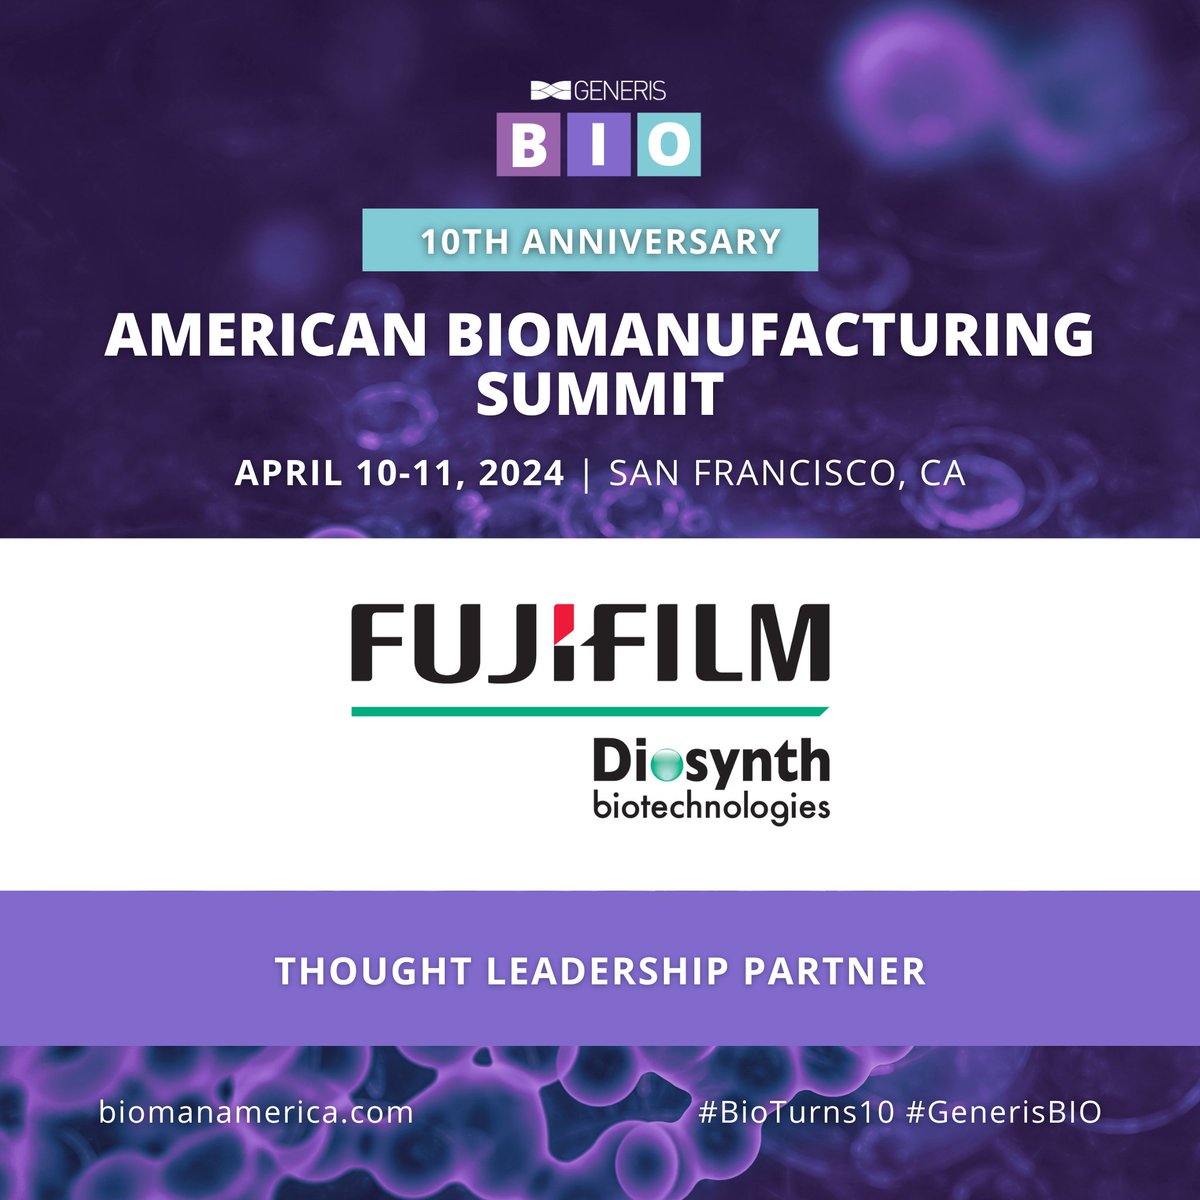 We are thrilled to announce our participation in the 10th American Biomanufacturing Summit, happening on April 10-11! Come meet our dedicated team at Booth 45 and discover how we're dedicated to being Partners for Life. See you there! #Biomanufacturing #Innovation #Networking